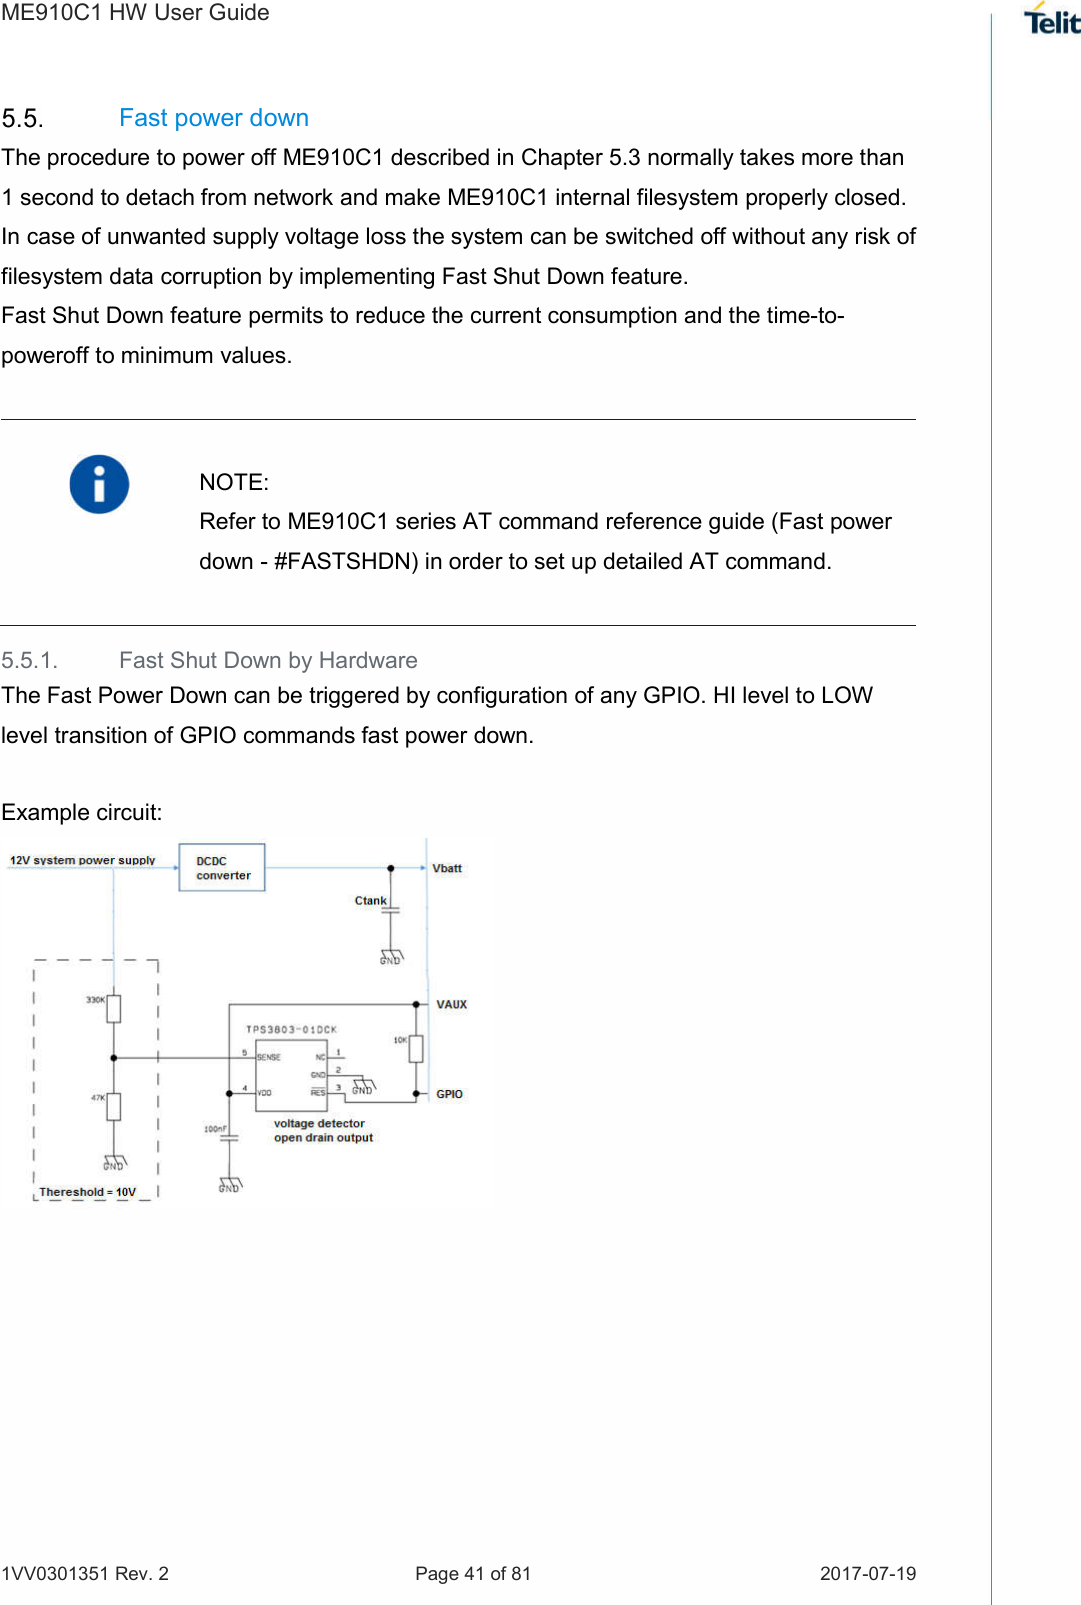 ME910C1 HW User Guide 1VV0301351 Rev. 2  Page 41 of 81  2017-07-19   Fast power down The procedure to power off ME910C1 described in Chapter 5.3 normally takes more than 1 second to detach from network and make ME910C1 internal filesystem properly closed. In case of unwanted supply voltage loss the system can be switched off without any risk of filesystem data corruption by implementing Fast Shut Down feature. Fast Shut Down feature permits to reduce the current consumption and the time-to-poweroff to minimum values.   NOTE: Refer to ME910C1 series AT command reference guide (Fast power down - #FASTSHDN) in order to set up detailed AT command. 5.5.1.  Fast Shut Down by Hardware The Fast Power Down can be triggered by configuration of any GPIO. HI level to LOW level transition of GPIO commands fast power down. Example circuit:   